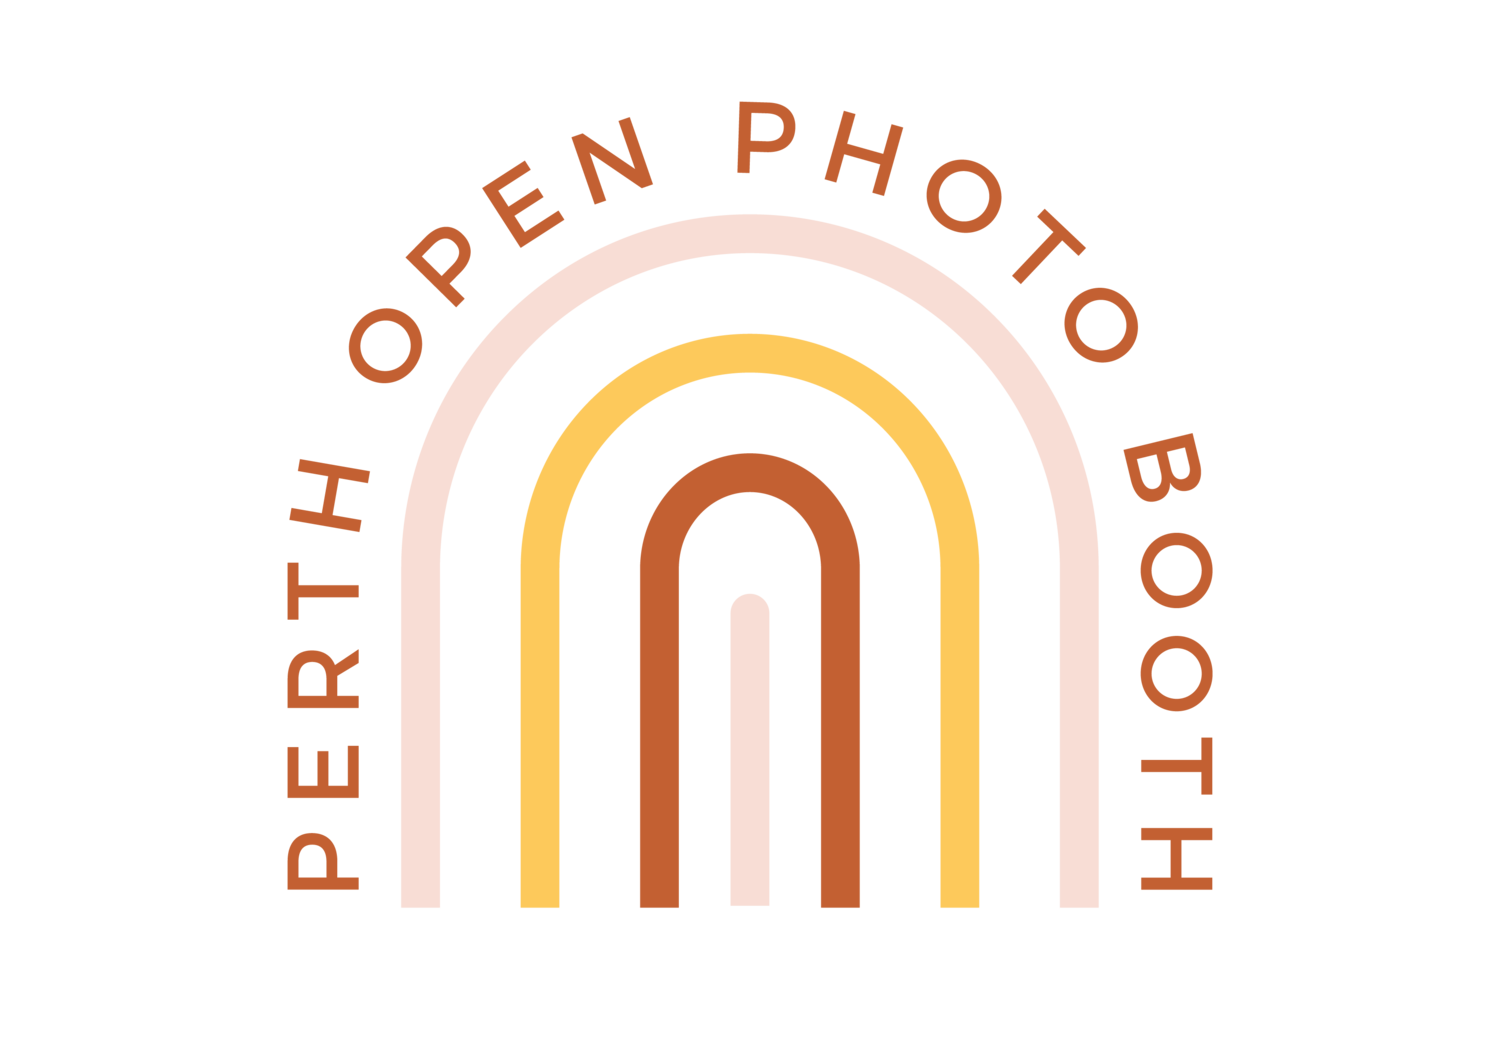 Perth Open Photo Booth